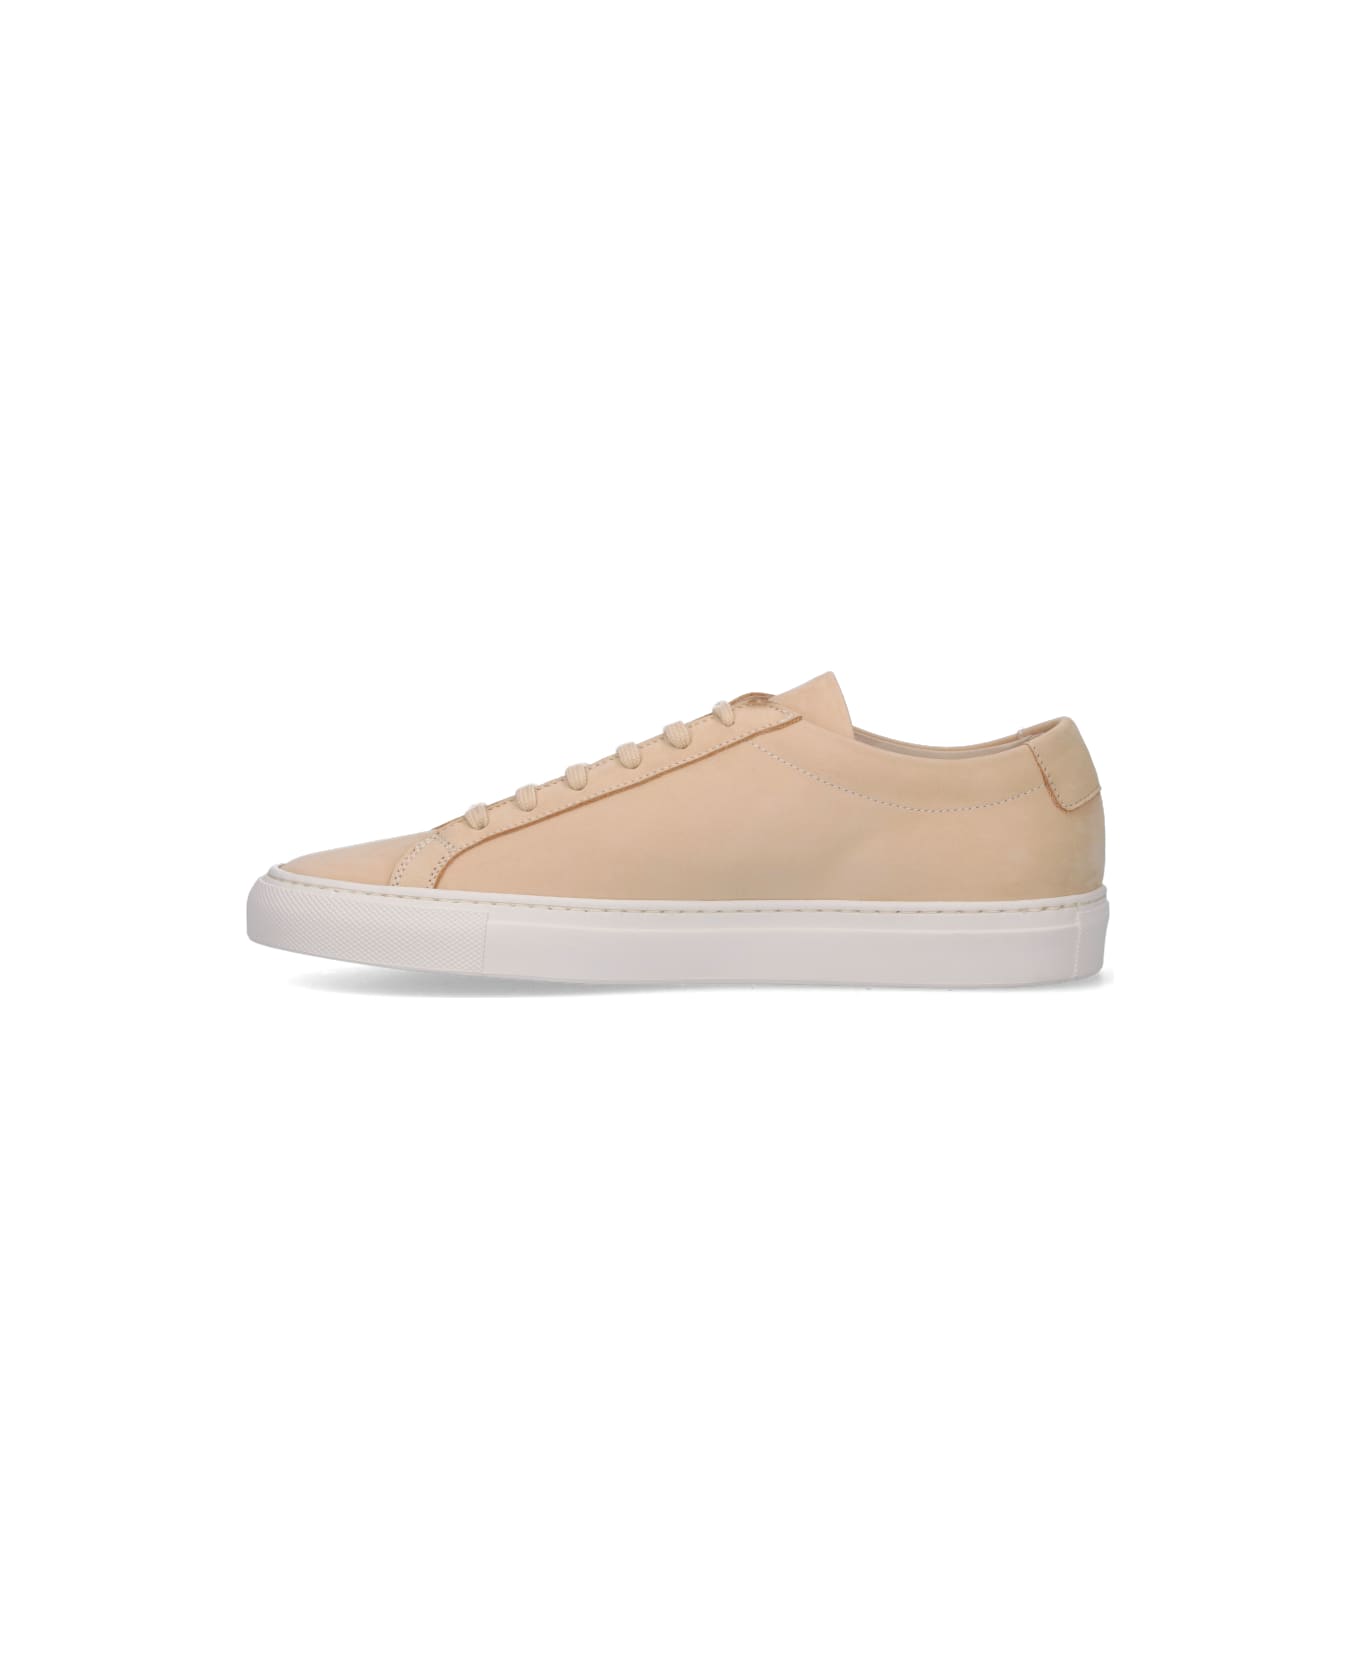 Common Projects Logo Low Sneakers - Beige